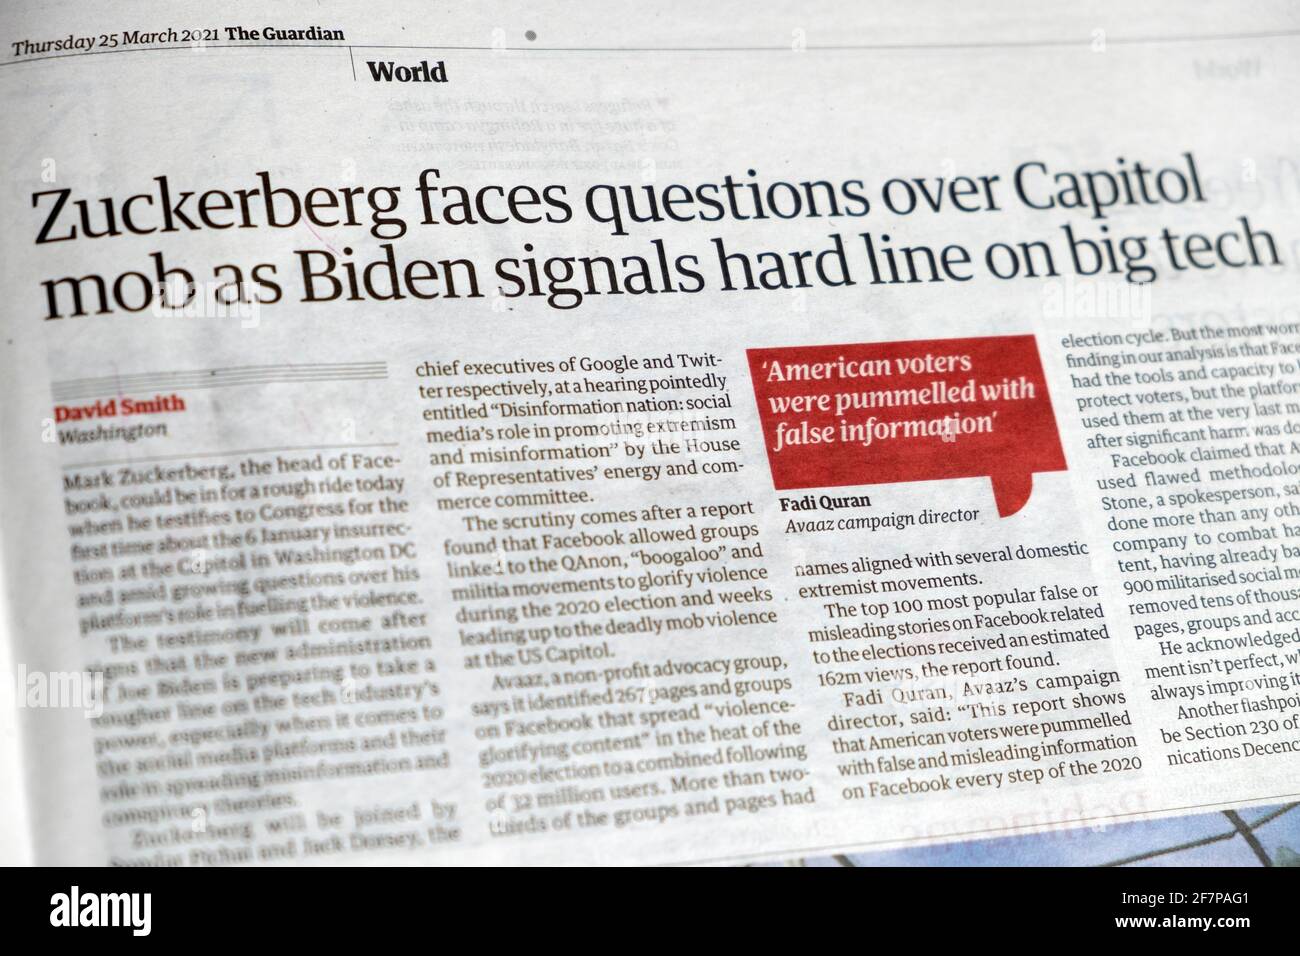 'Zuckerberg faces questions over Capitol mob as Biden signals hard line on big tech' newspaper headline article in Guardian 25 March 2021 London UK Stock Photo